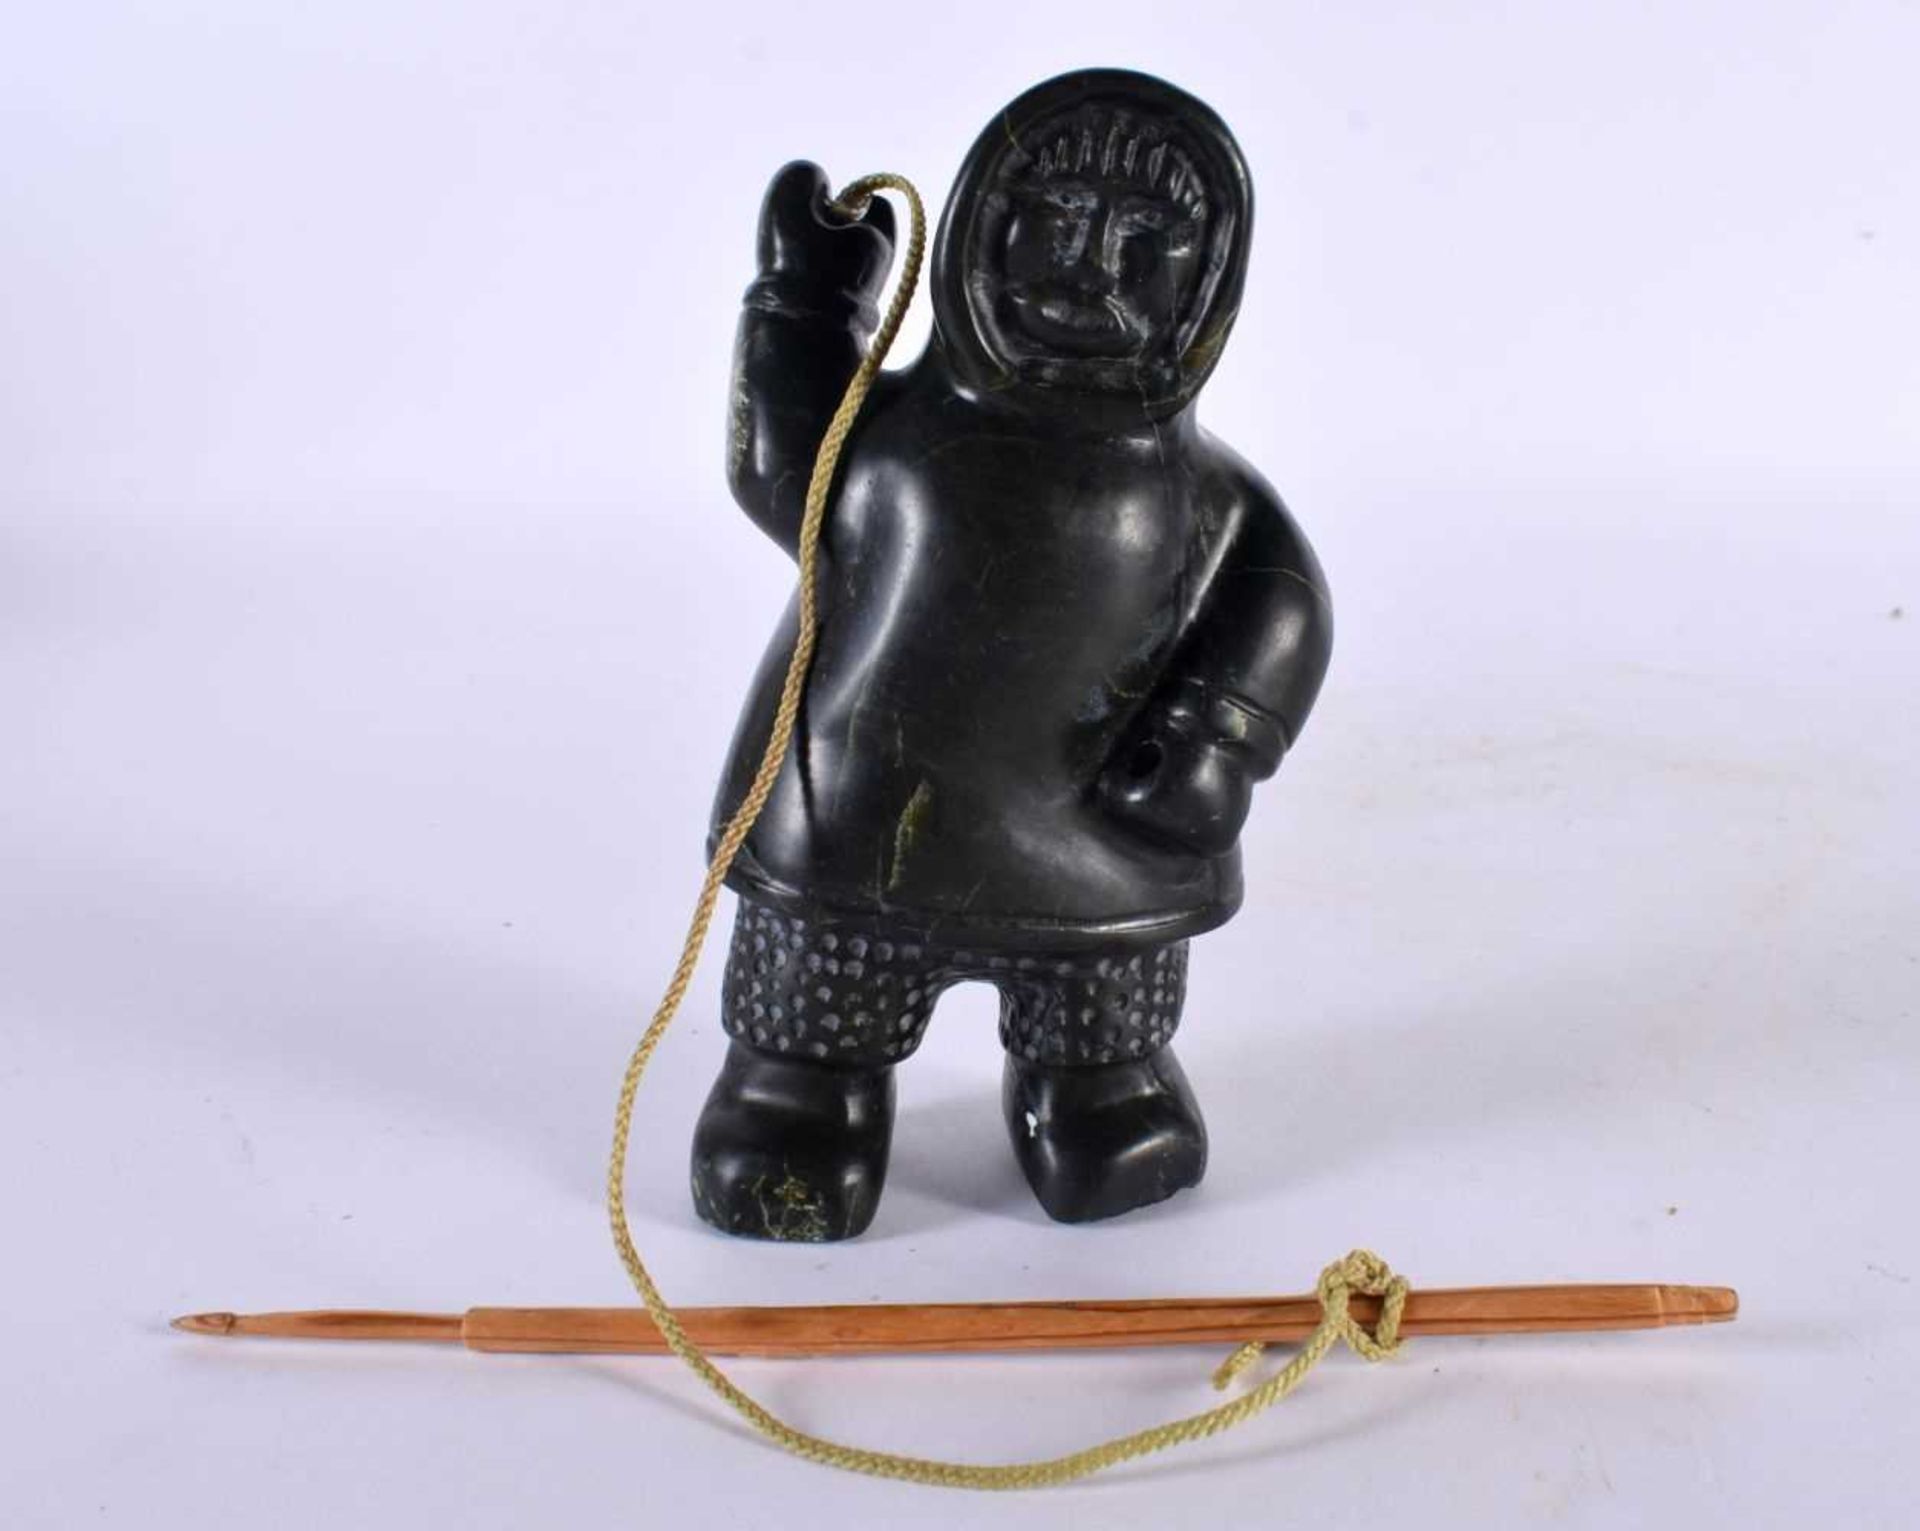 A NORTH AMERICAN CARVED JADE INUIT FIGURE OF AN ESKIMO SEAL HUNTER modelled holding a spear and